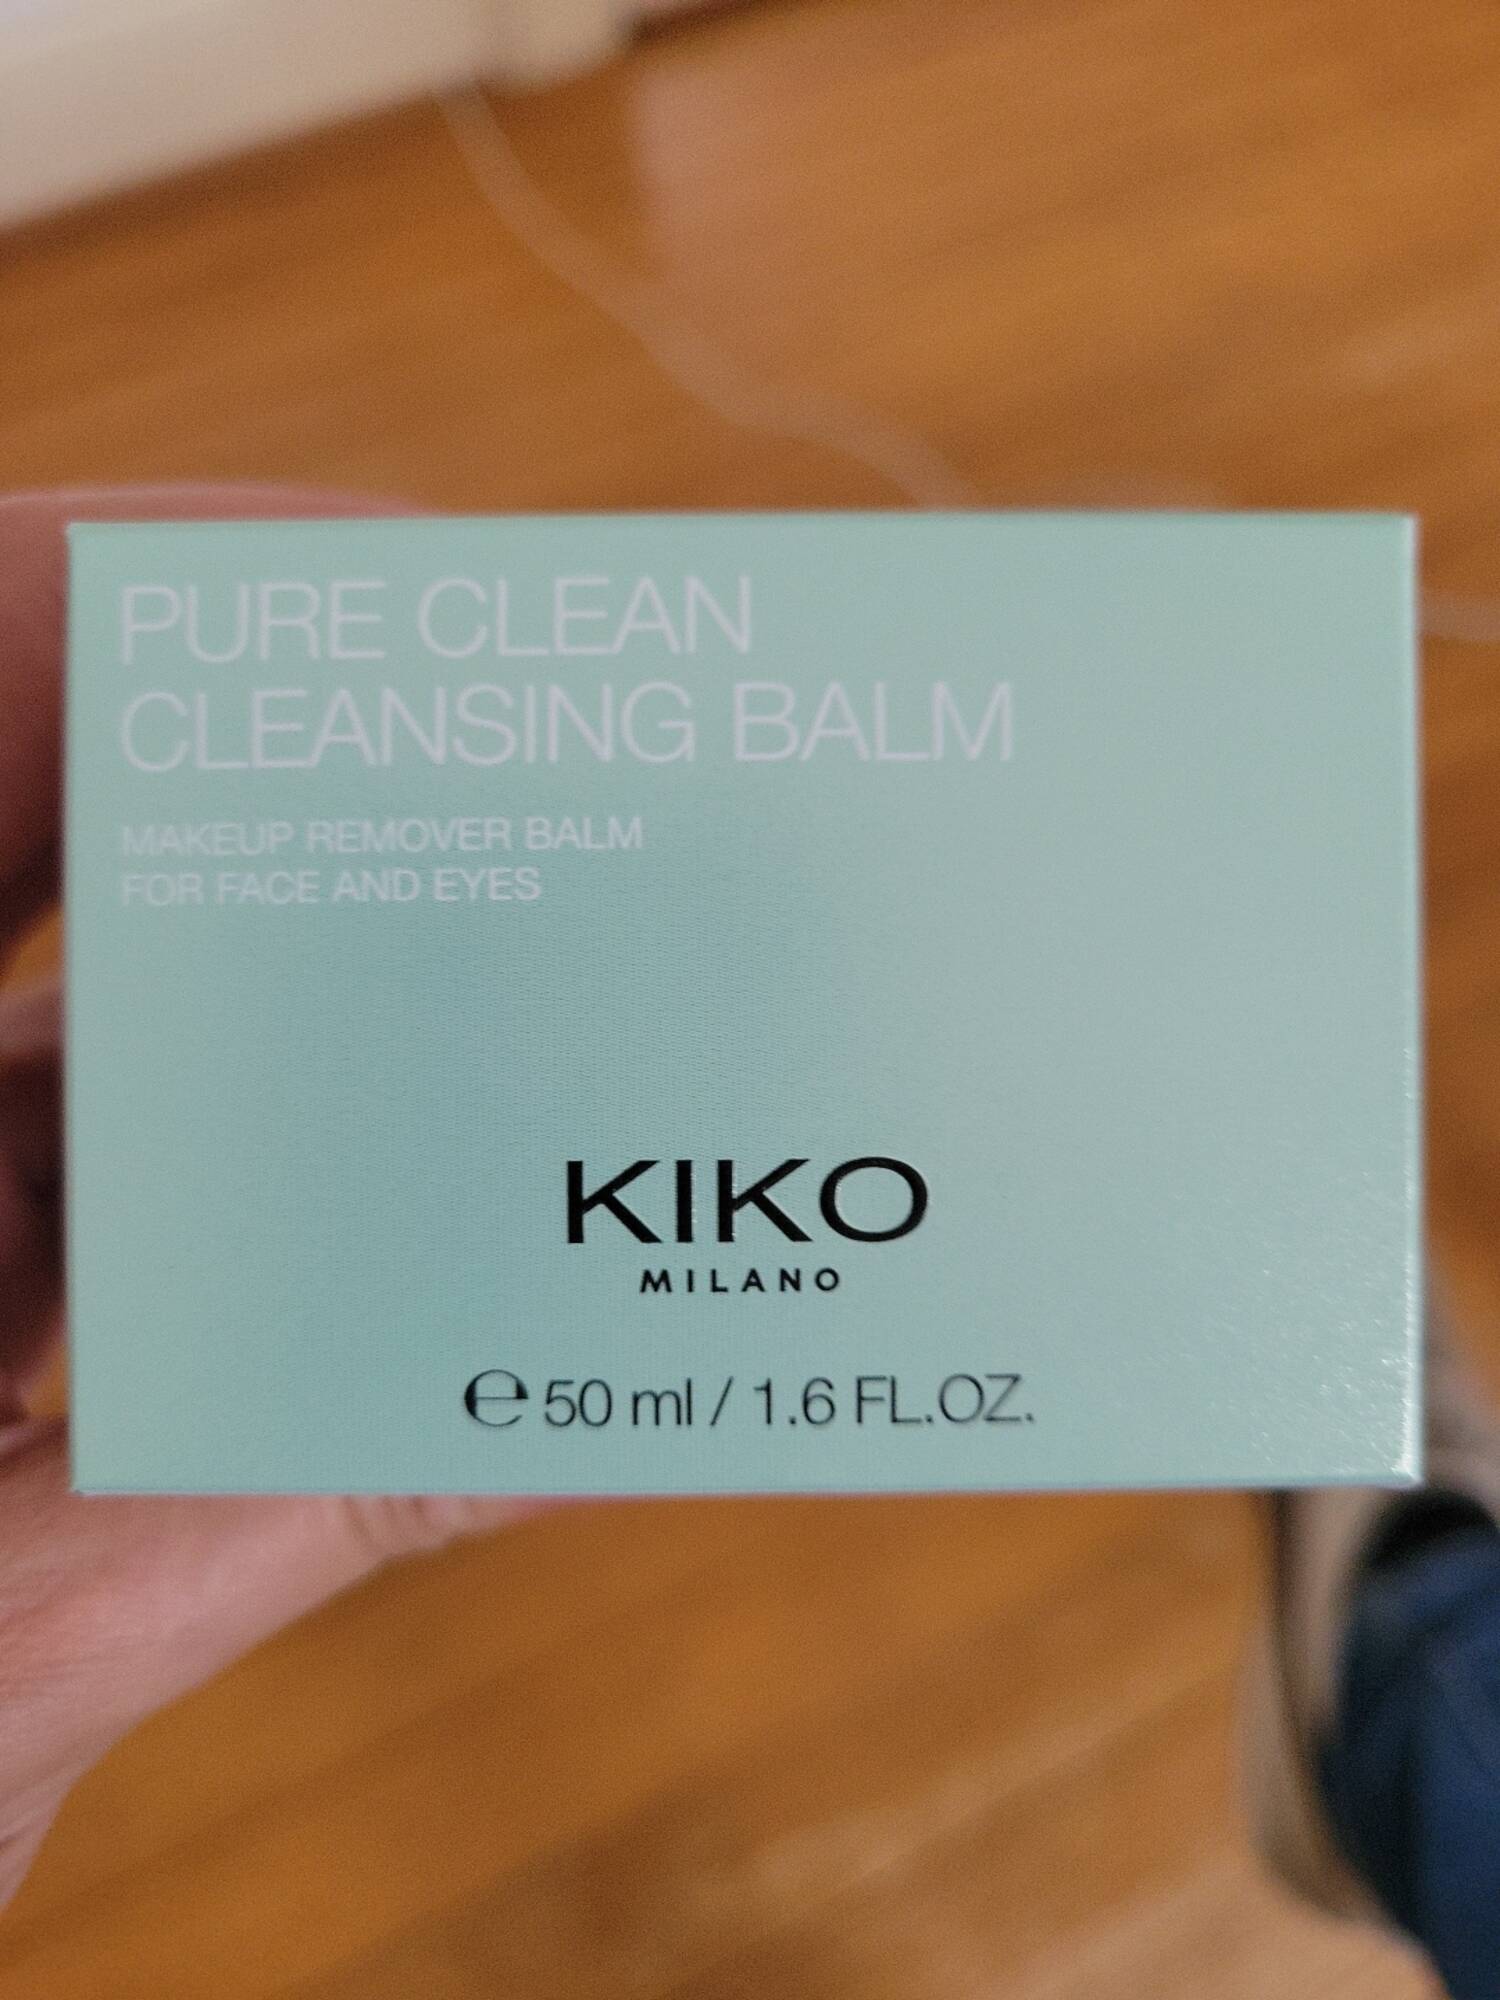 KIKO - Pure clean - Cleansing balm for face and eyes